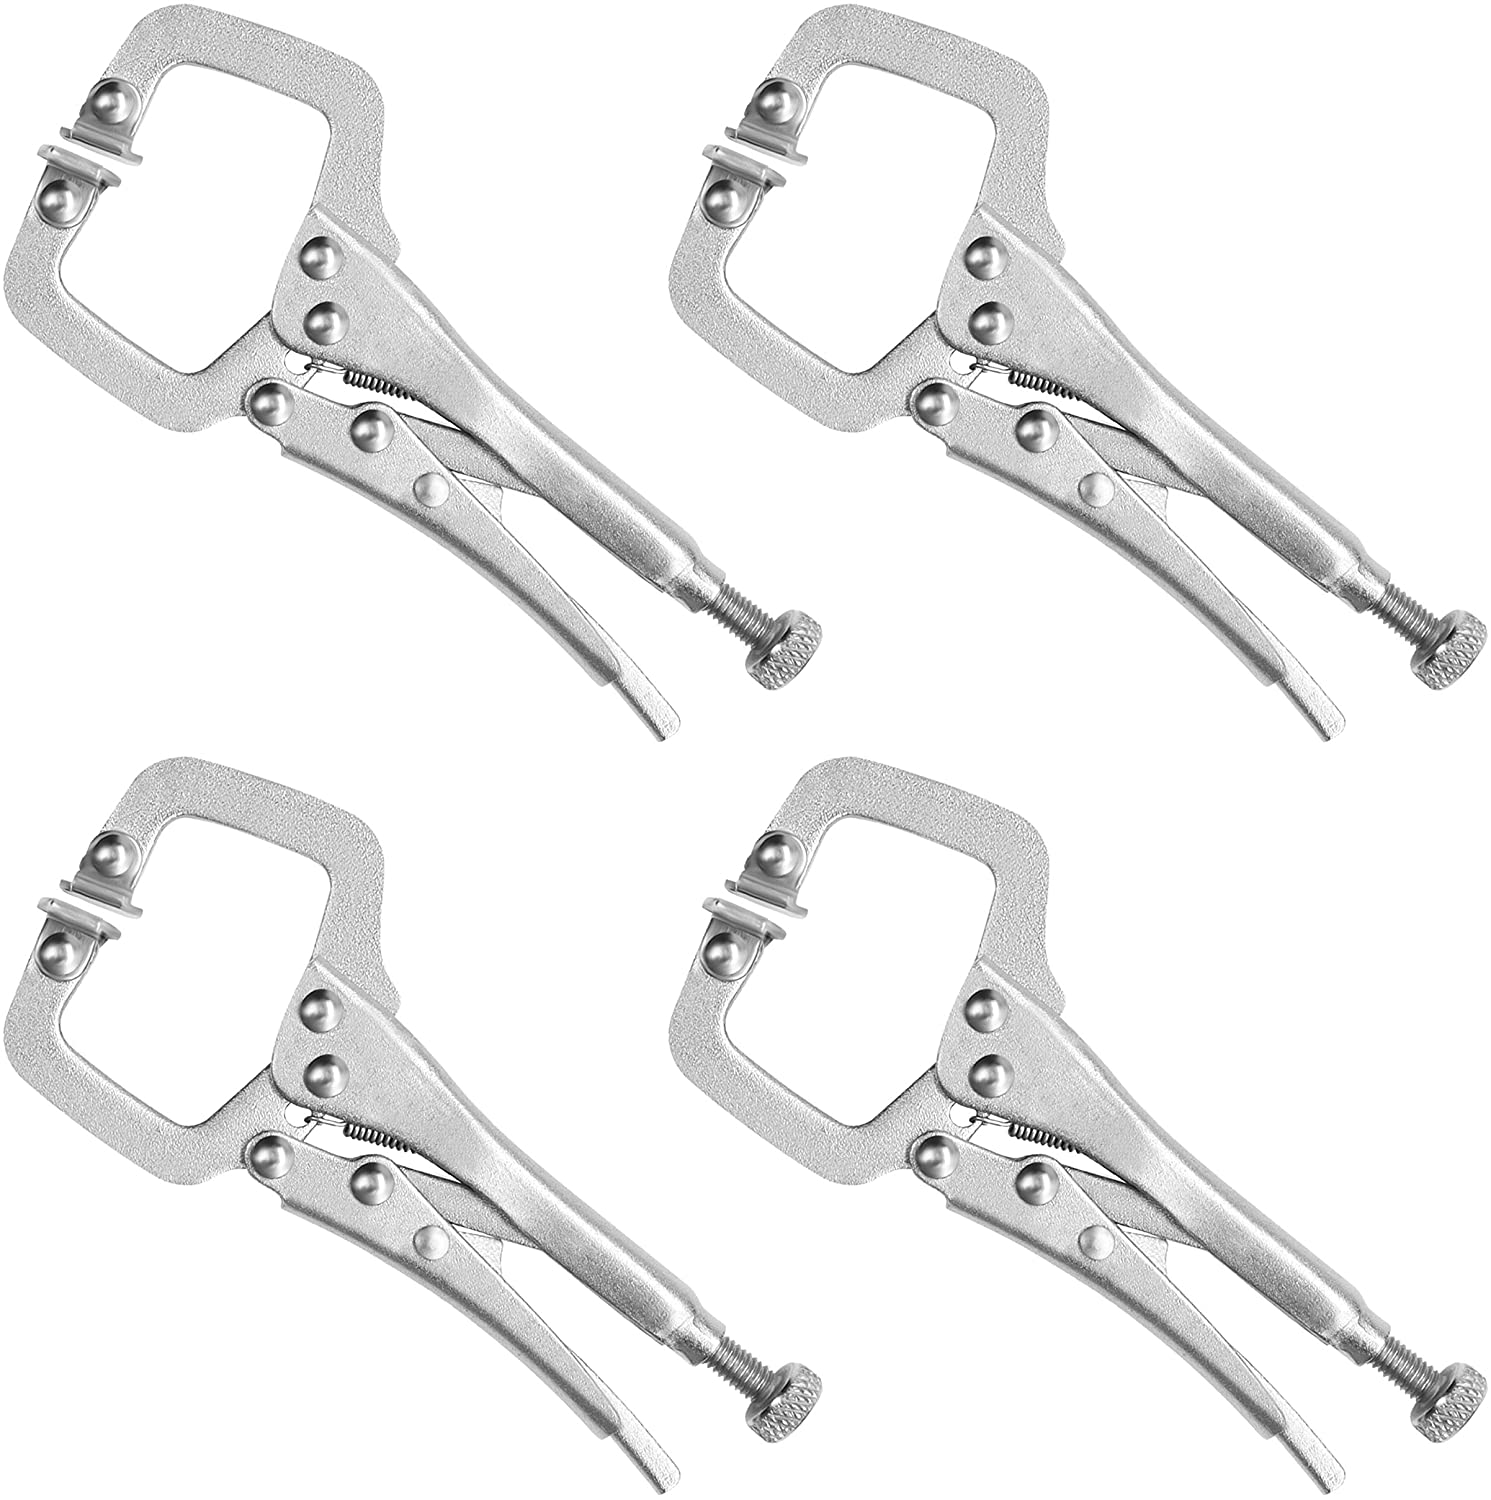 Metal Grip Locking C Clamp Pliers With Adjustable Screw And Swivel Pads (4 Pack)   Mini Easy And Quick Release Welding Pliers For Uneven Surfaces, Angles, Crafts & Hobbies 